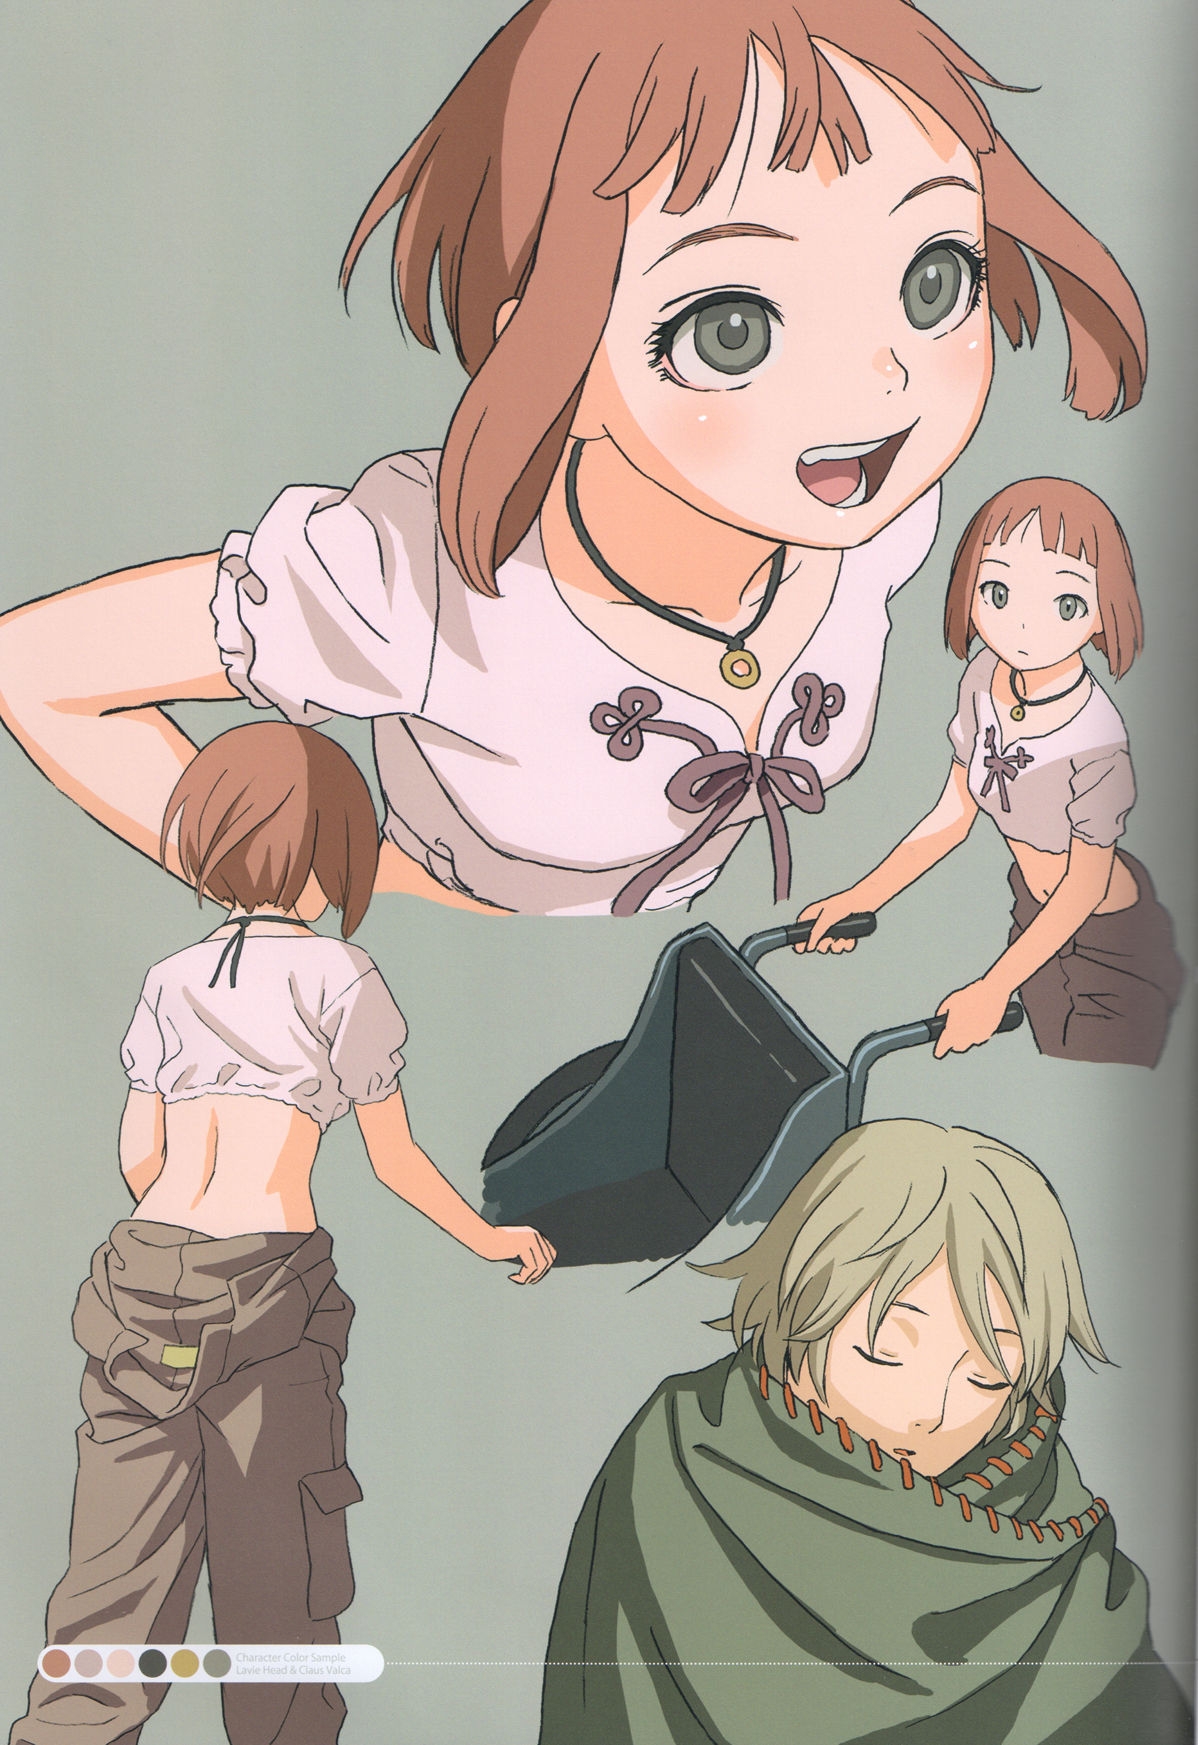 [Pasta's Estab (Range Murata)] Linkage - Last Exile ~ Fam, The Silver Wing - Character Filegraphy 02 4